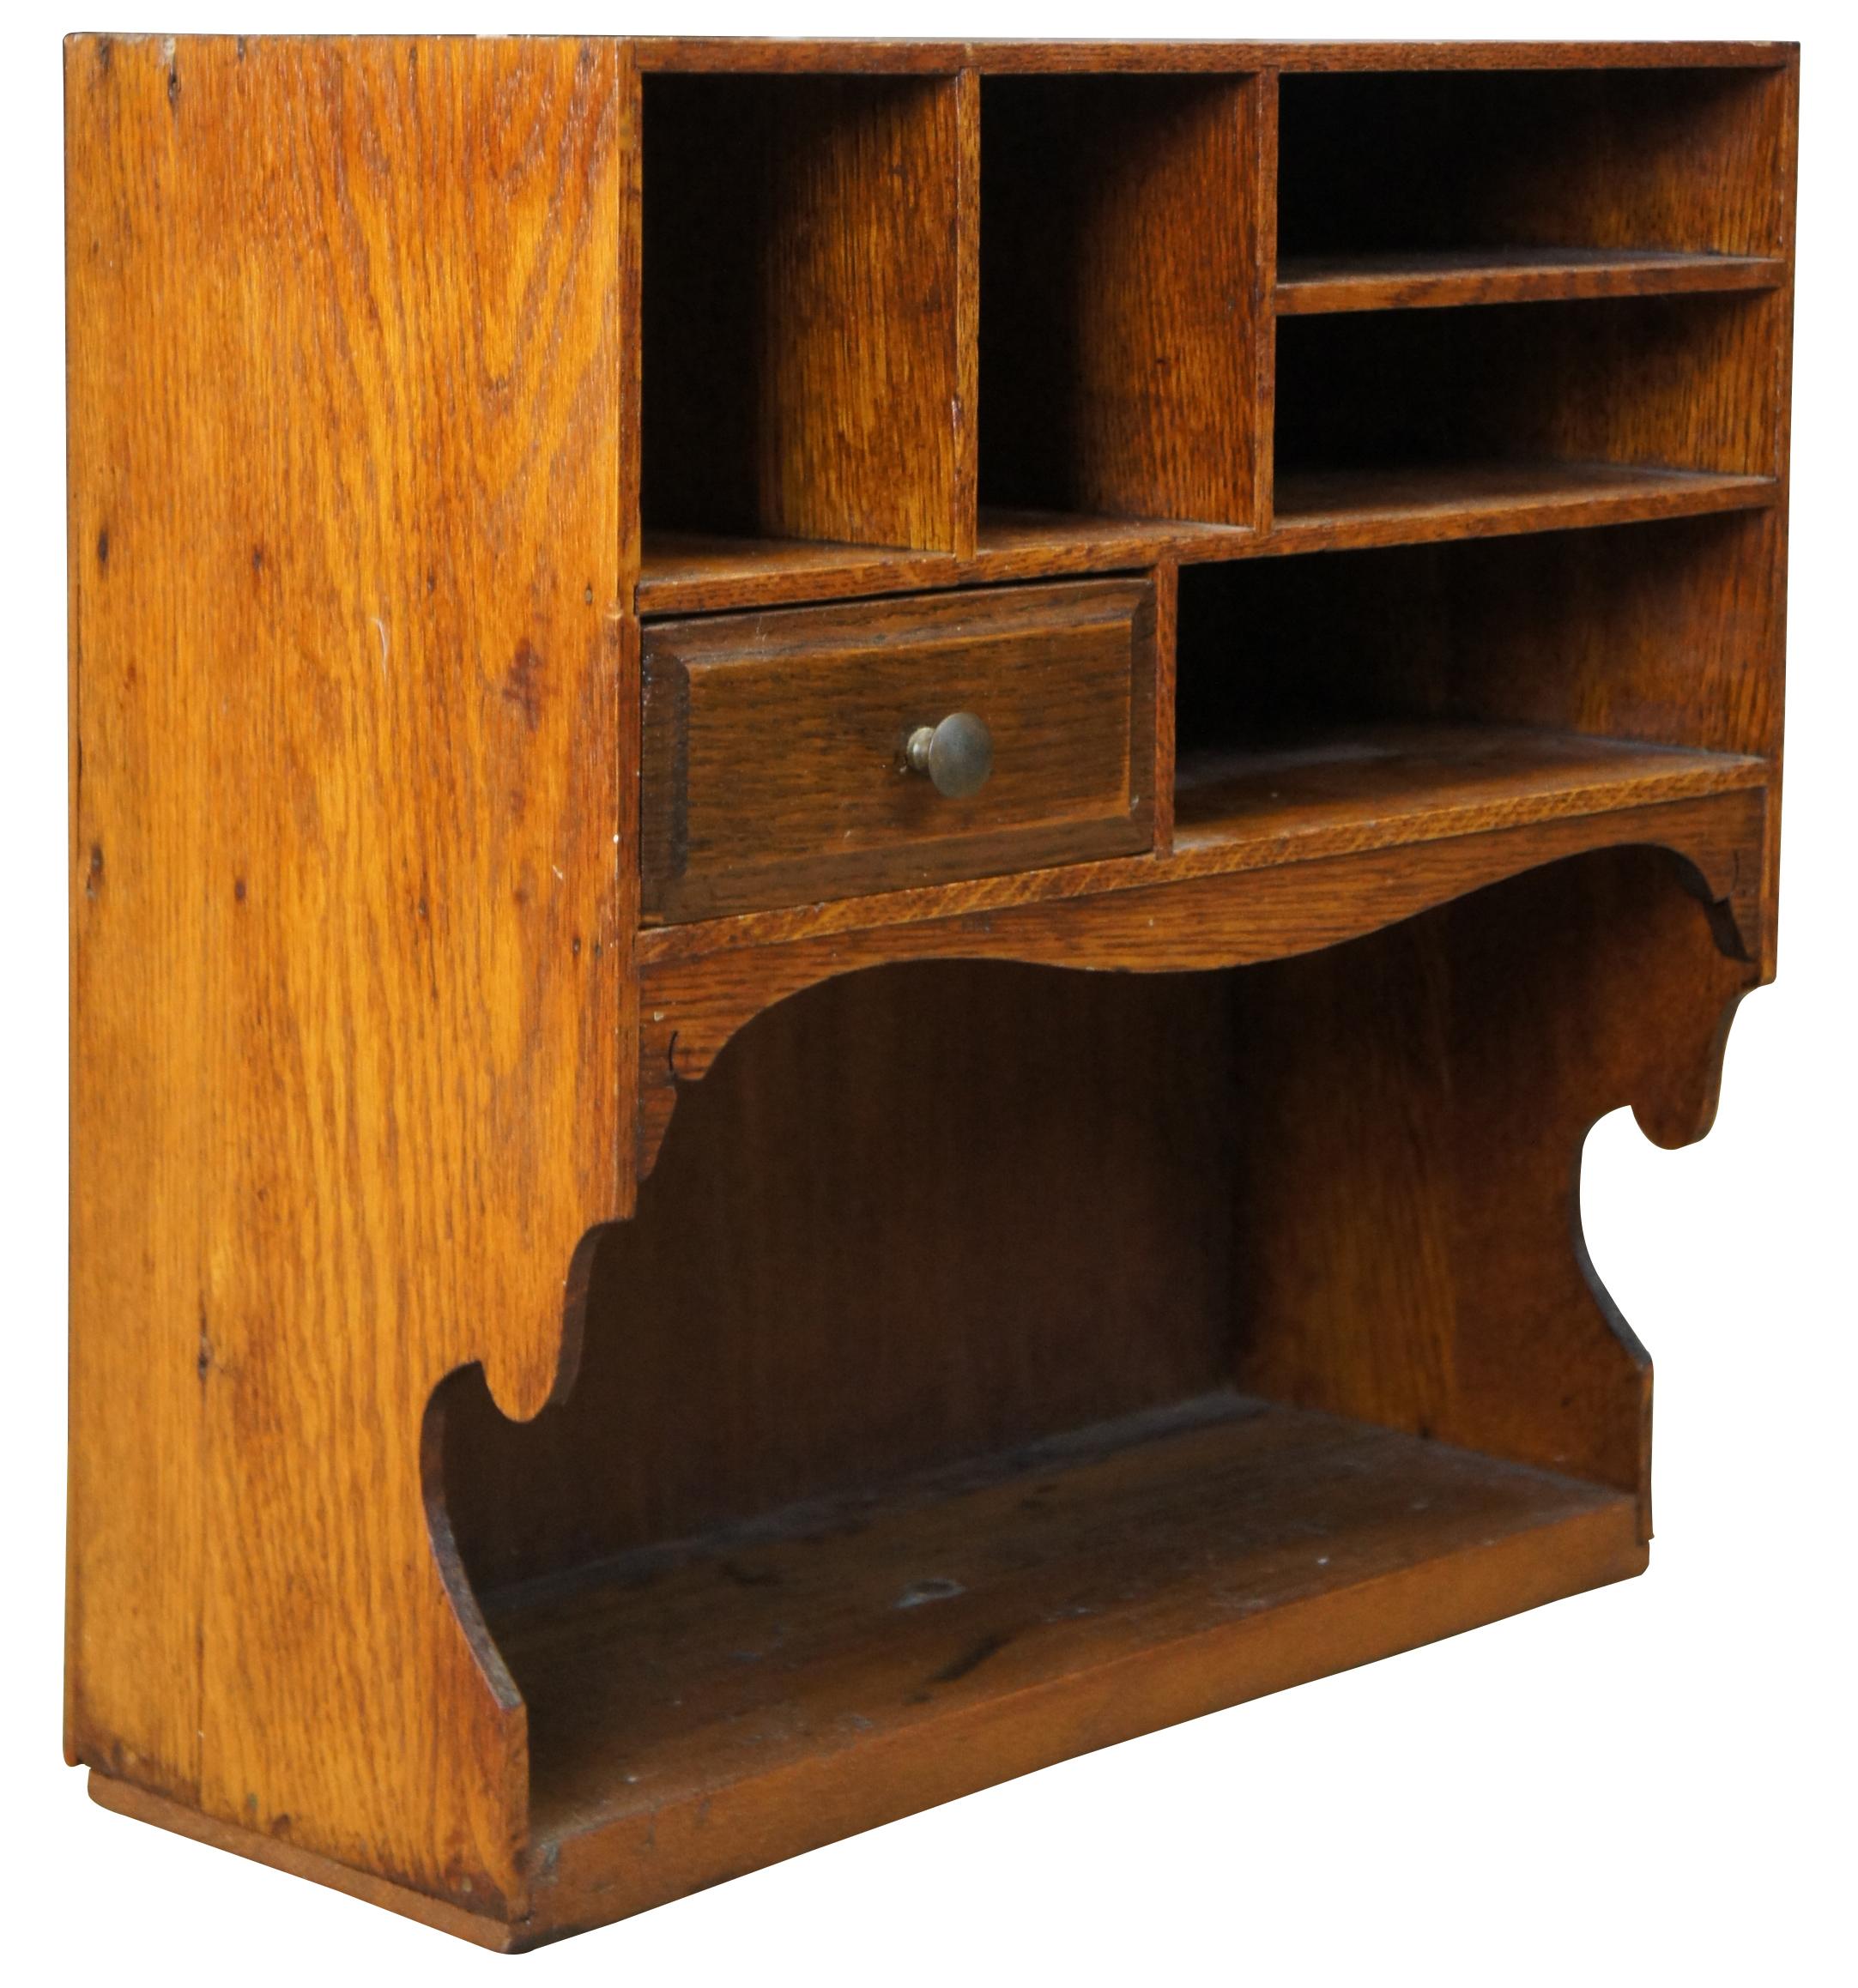 Antique oak desktop or hanging organizer. Includes 5 cubbies and a drawer for storage over a large lower shelf.